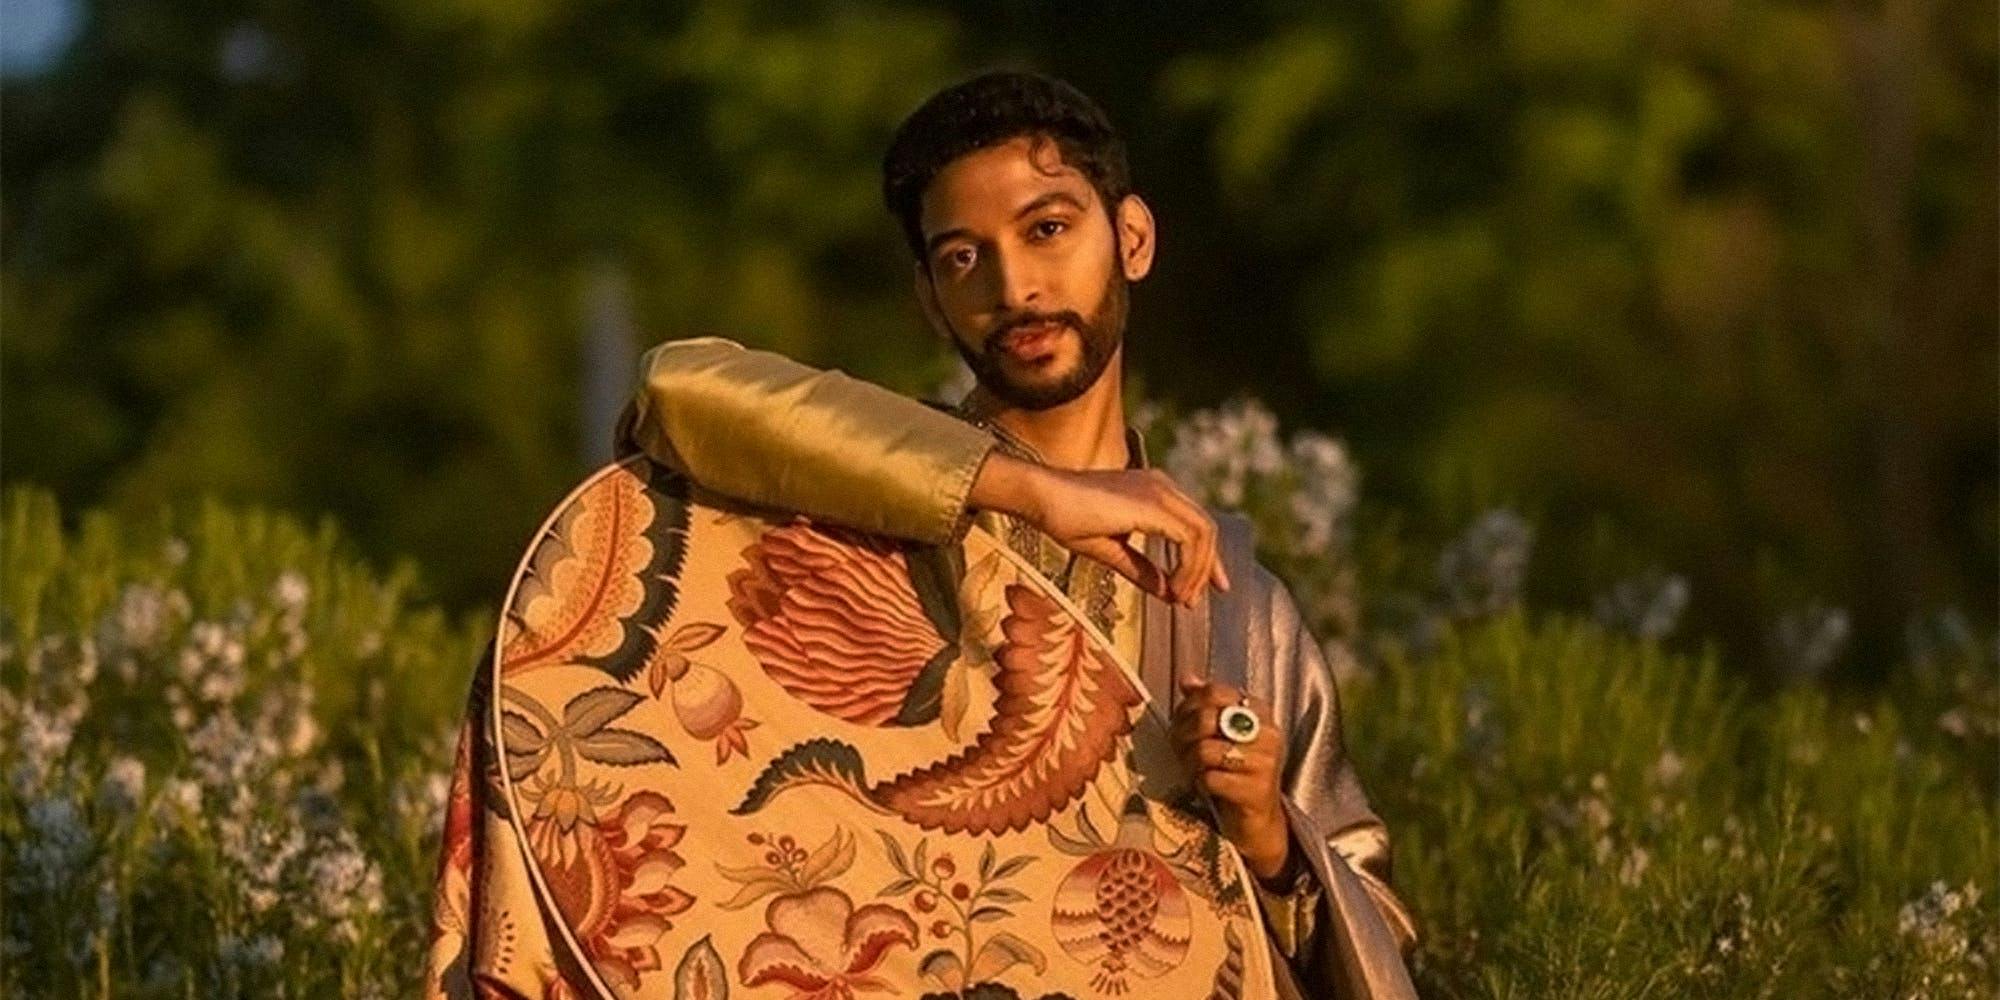 Anthony Gomes Is Turning Thrift Finds Into Elegant ‘Indo-Western’ Outfits—And He’s Challenging Gender Norms Along the Way